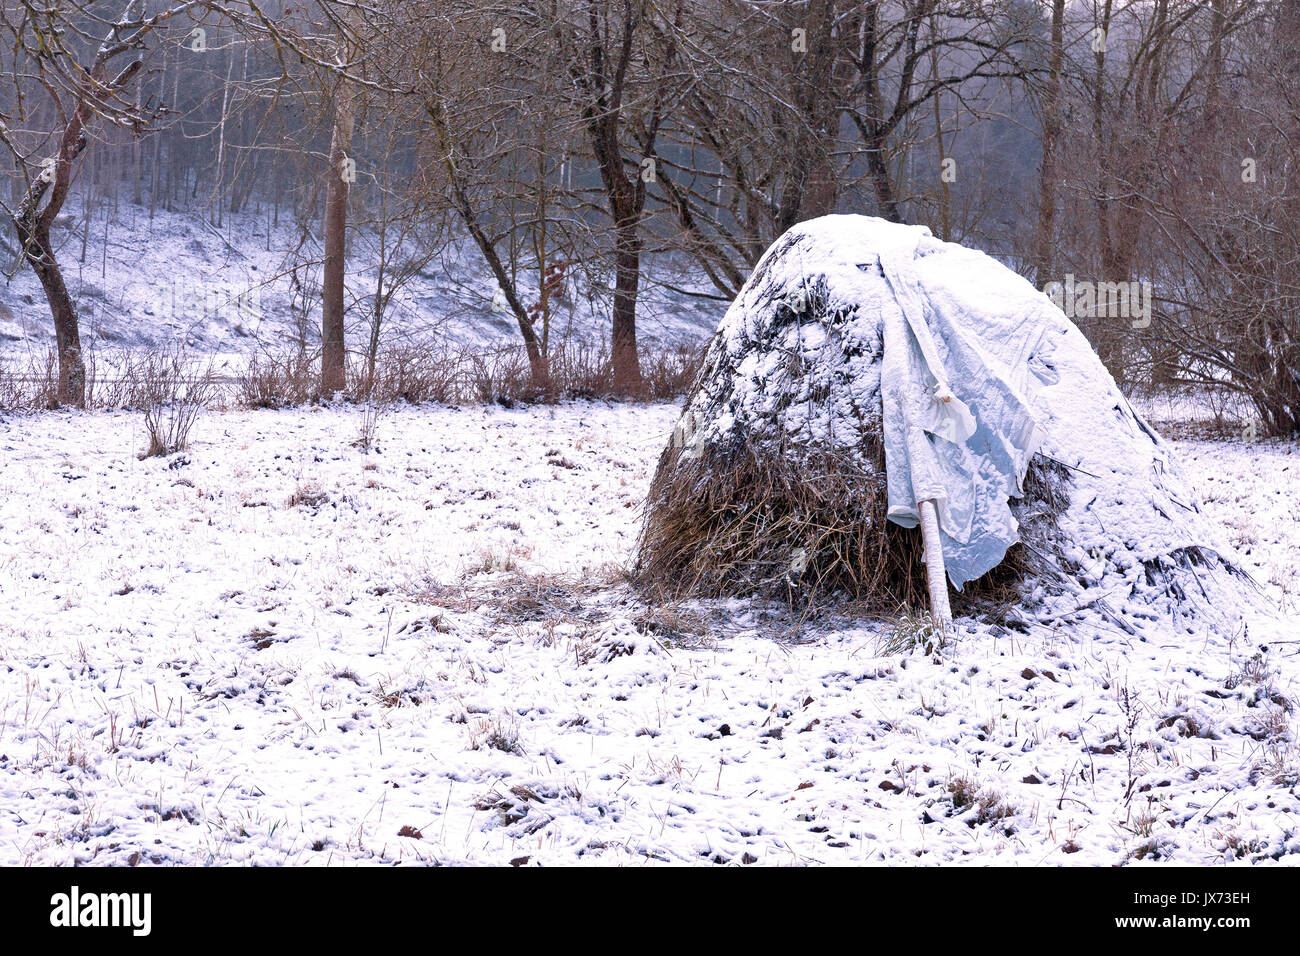 Rural nature season scene: hay stack in winter forest covered by snow Stock Photo